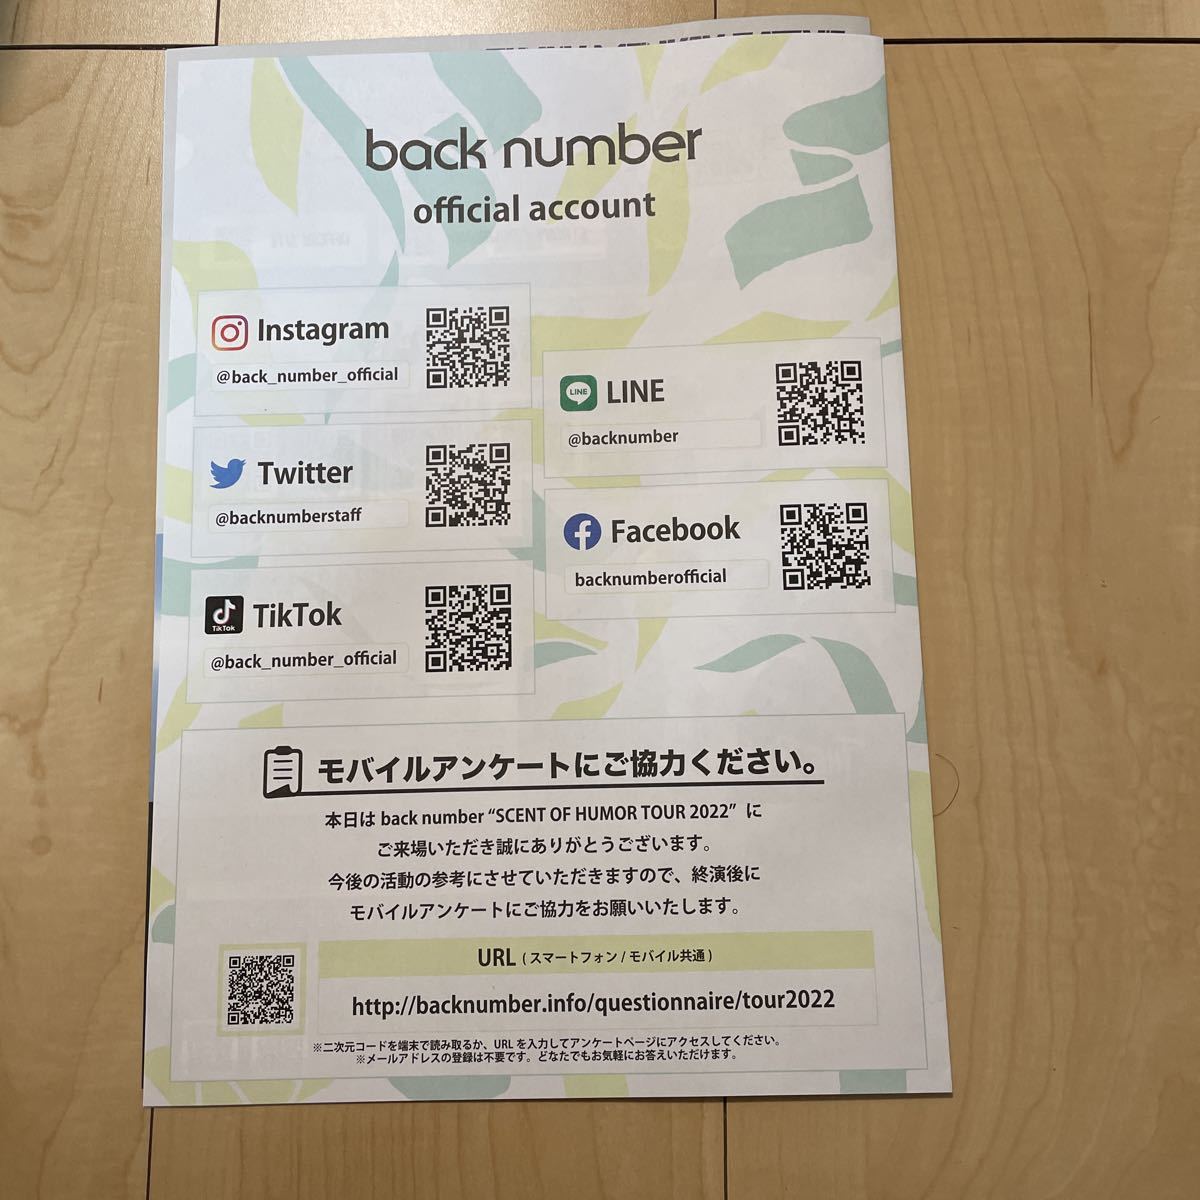 back number SCENT OF HUMOR TOUR 2022 パンフレット バックナンバー サイン印字 フライヤー 非売品 ライブ ツアー グッズ 配布品_画像5